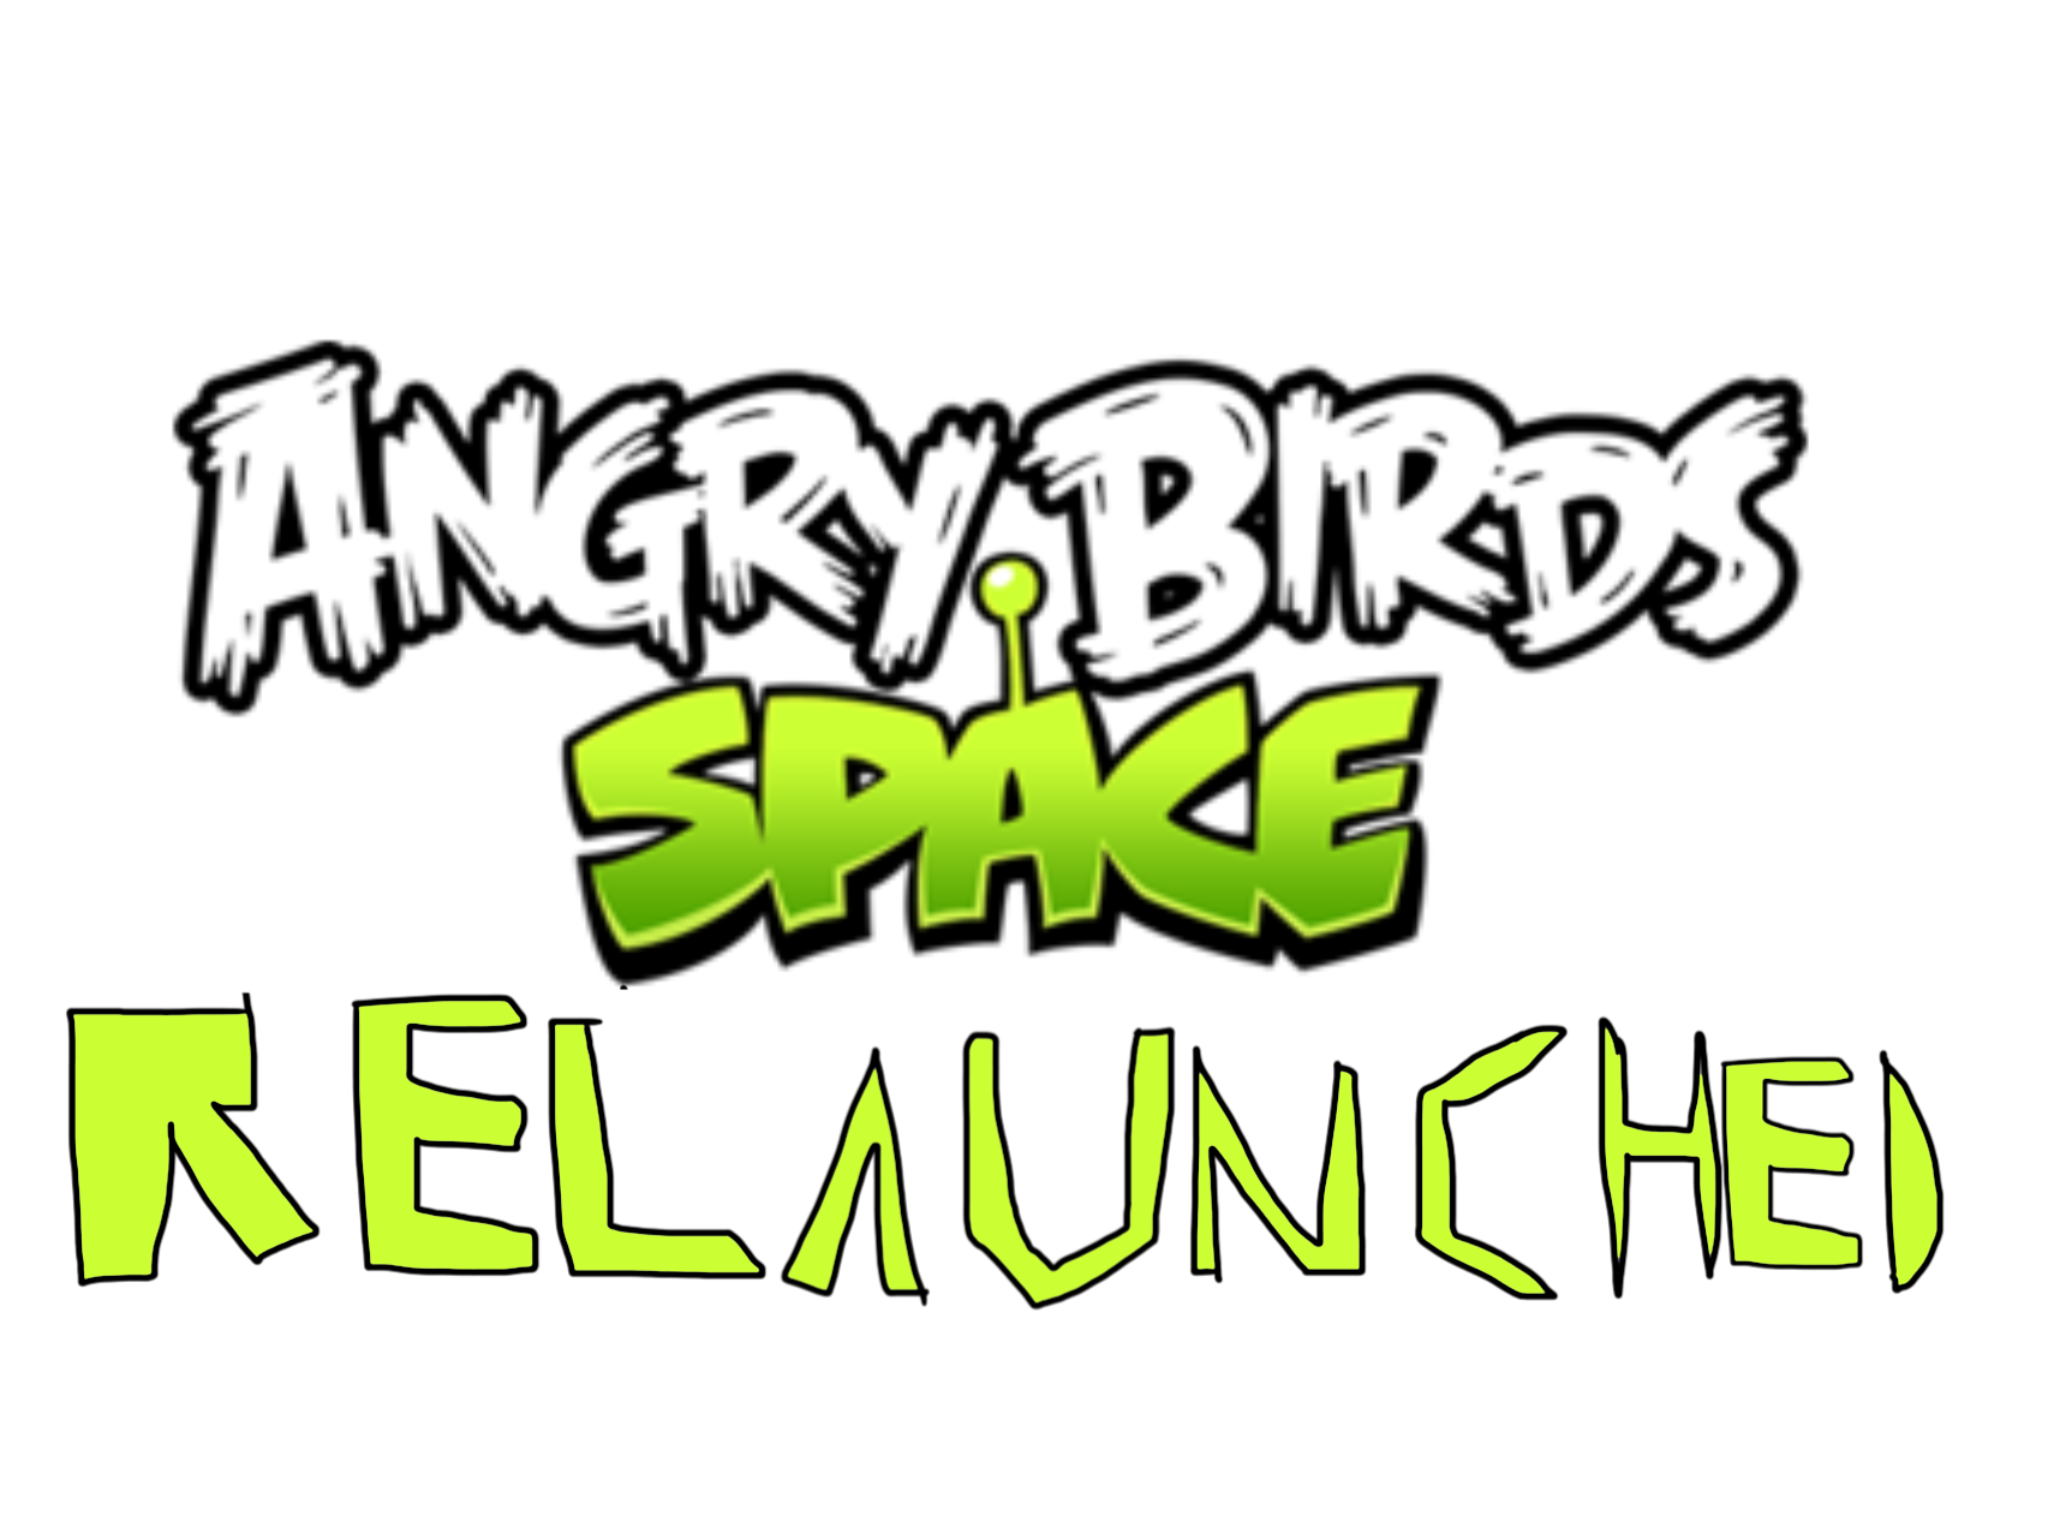 angry birds space pink bird